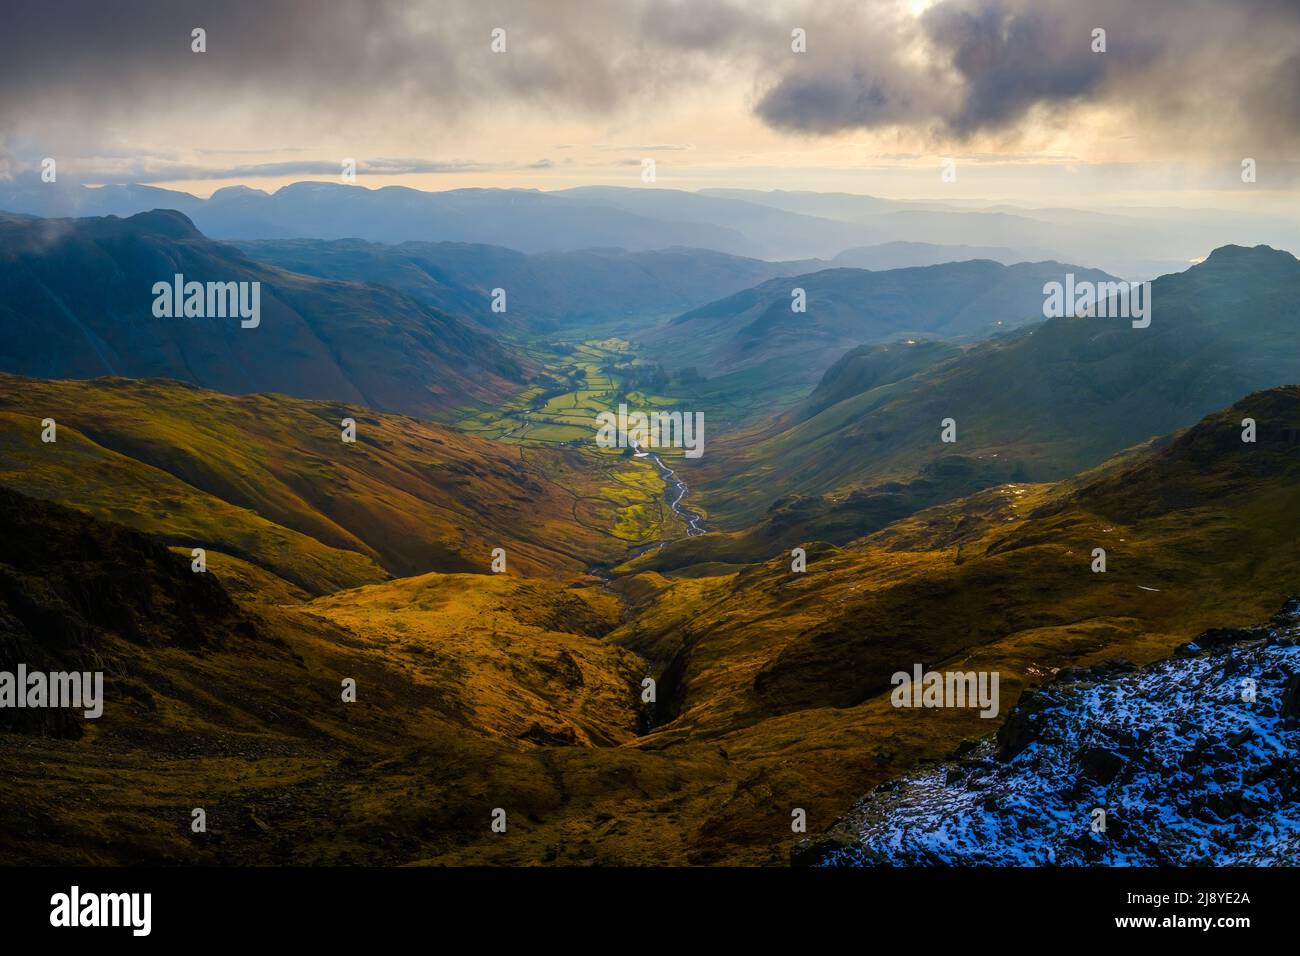 Oxendale & the Langdale Valley from Crinkle Crags, English Lake District, UK Stock Photo